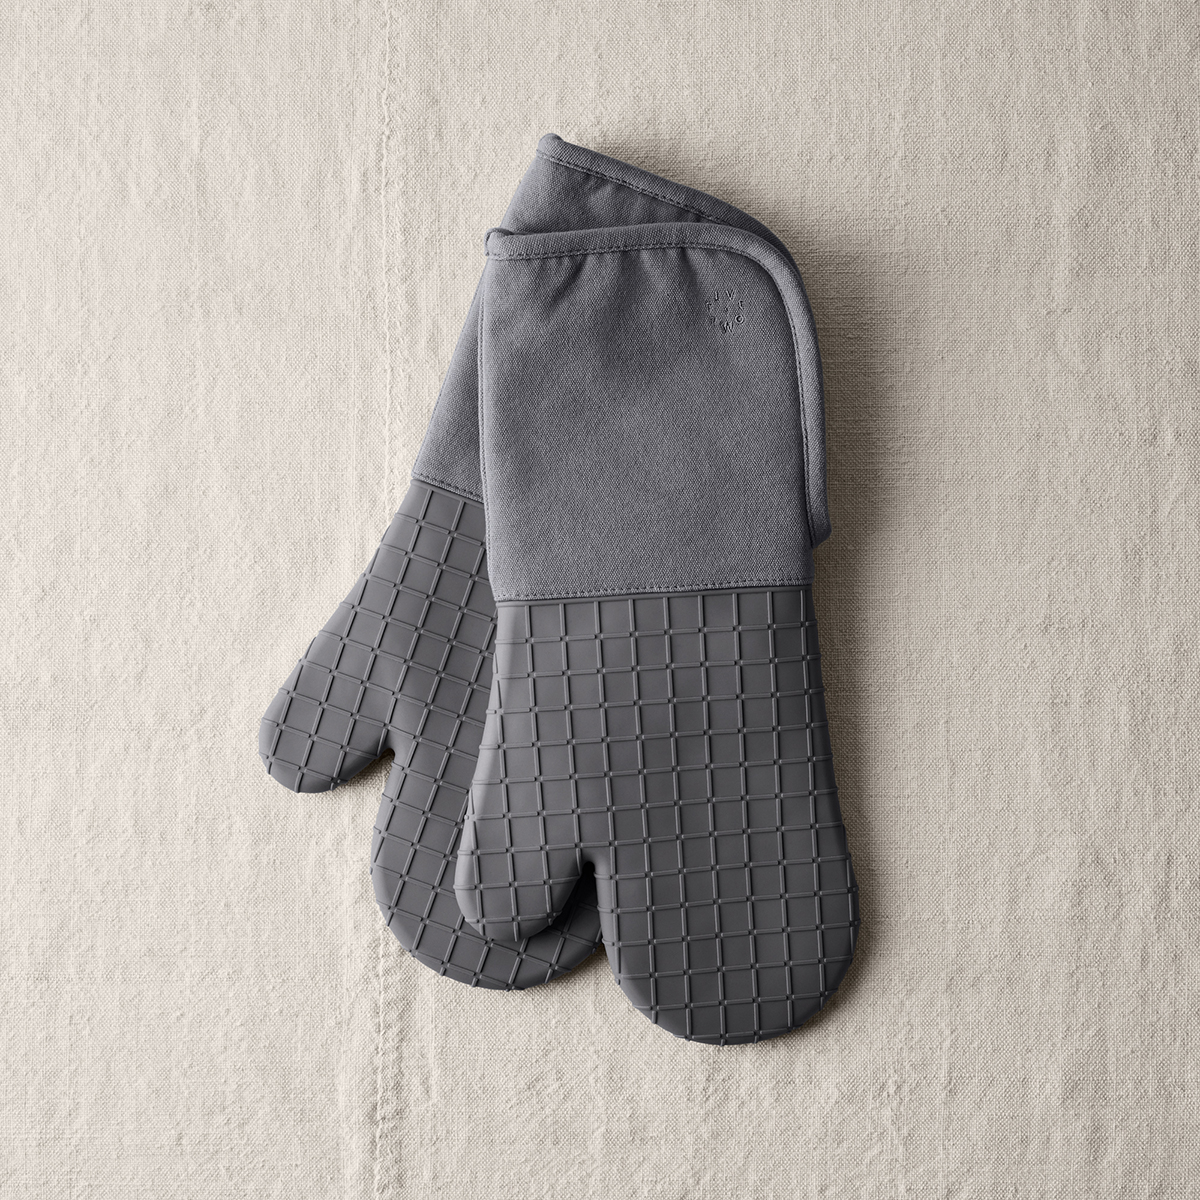 Cowboy Ranch Set of 2 Oven Mitts